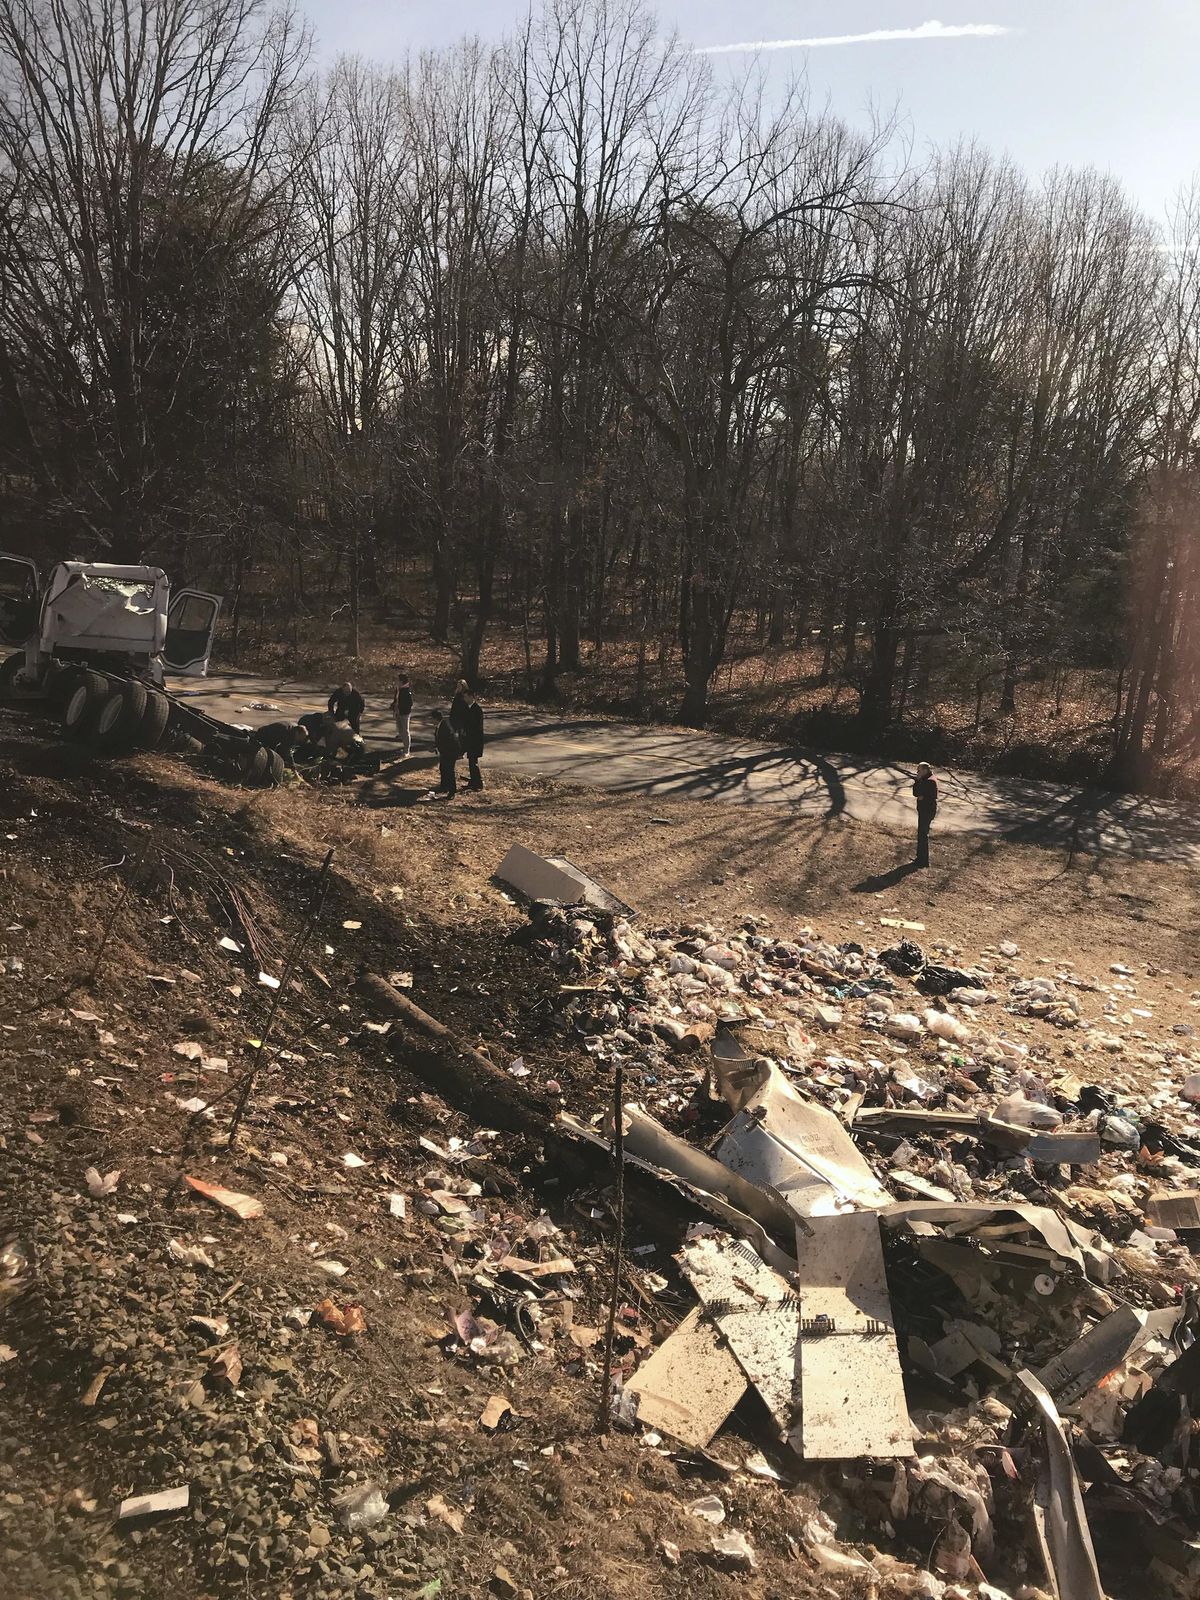 This photo provided by Rep. Greg Walden, R-Oregon, shows a crash site near Crozet, Va., Wednesday, Jan. 31, 2018. A chartered train carrying dozens of GOP lawmakers to a Republican retreat in West Virginia struck a garbage truck south of Charlottesville, Virginia on Wednesday, lawmakers said. (Rep. Greg Walden / AP)